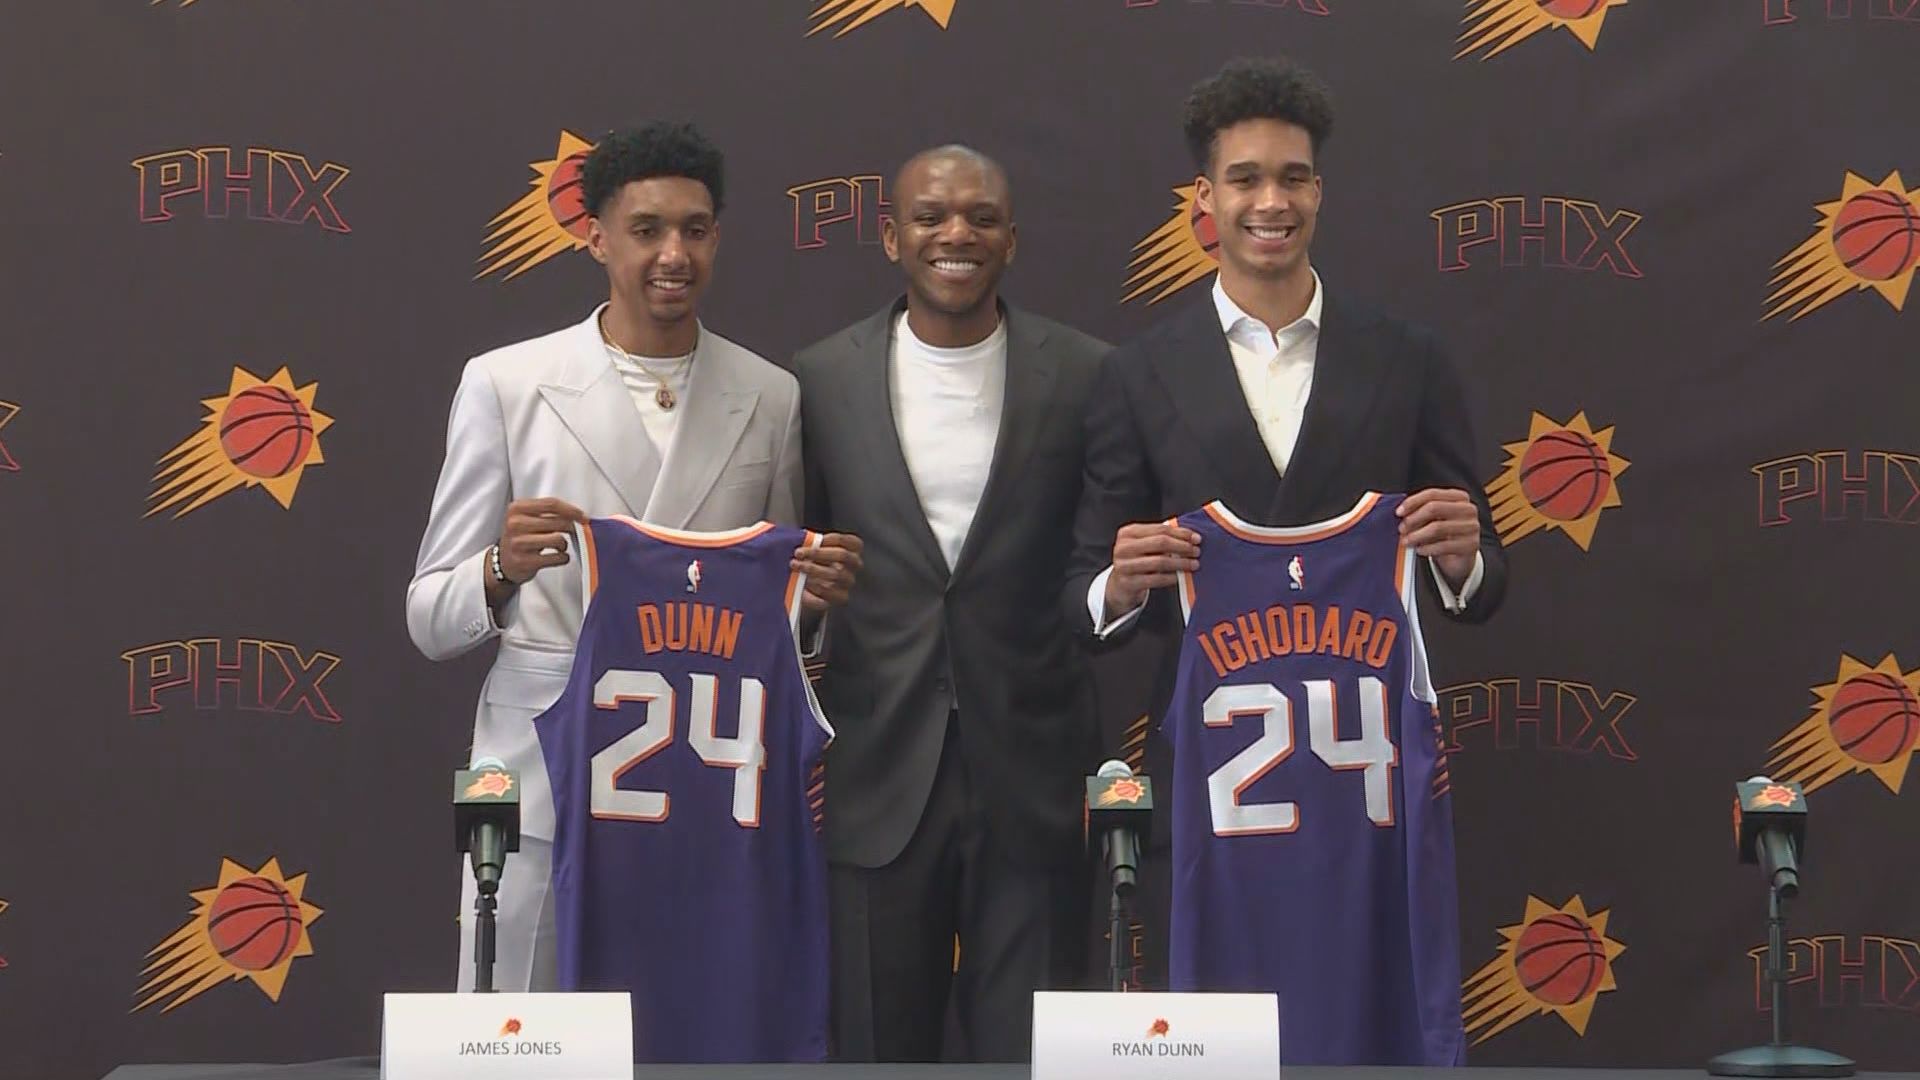 In this edition of "Here We Go!", Cam talks to 1-on-1 with Suns draft picks Ryan Dunn and Oso Ighodaro. Both are ready to help the team now!